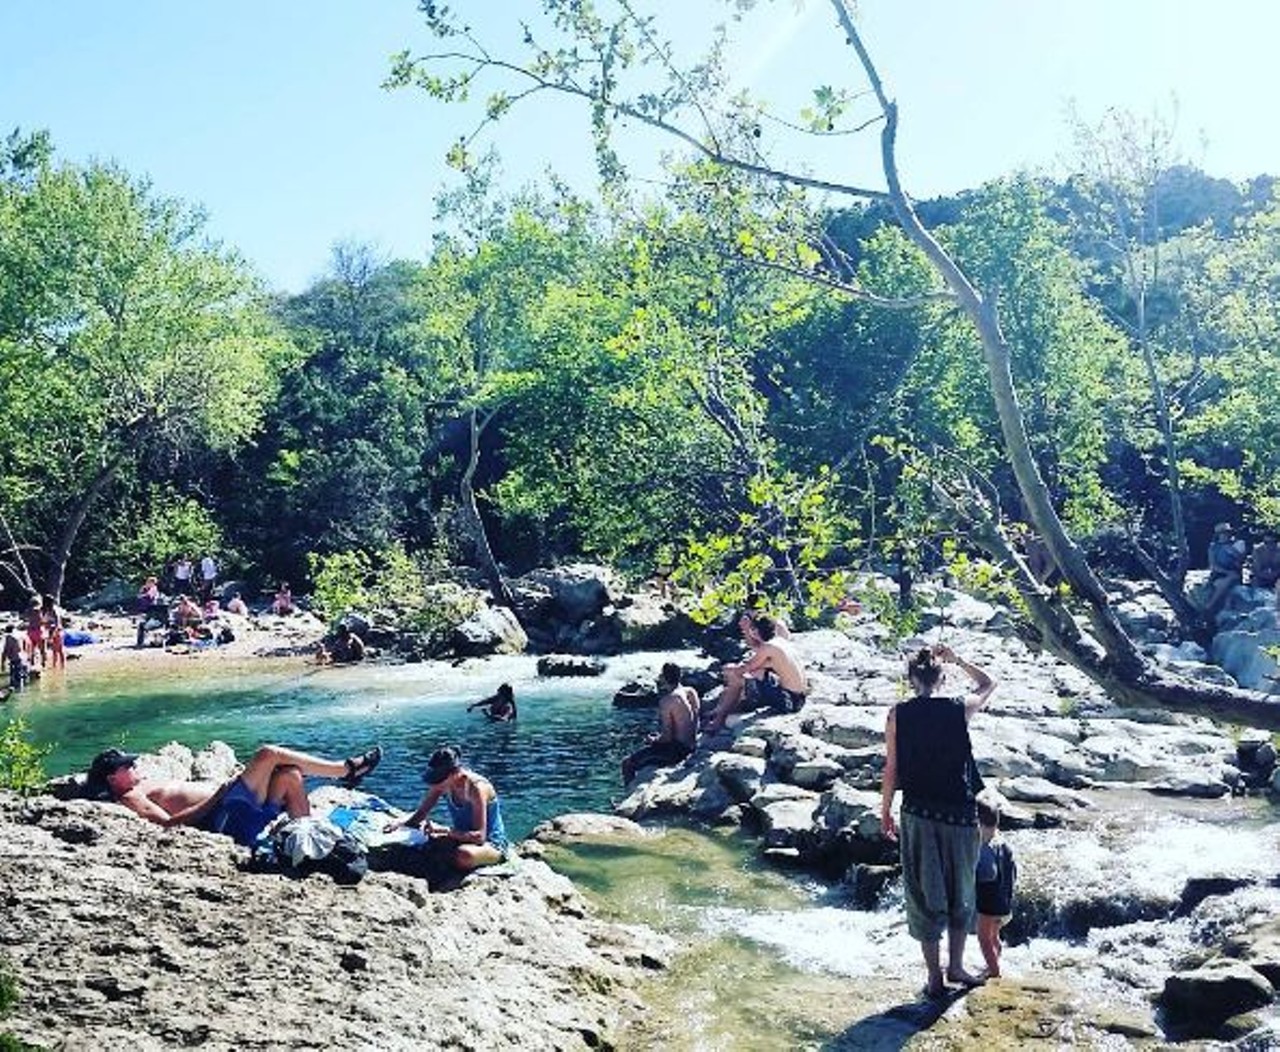 Twin Falls
S Mo-Pac Expy, Austin, (512) 974-6700, facebook.com/TwinFallsofAustin
You know you&#146;re tempted to belt out &#147;Part of Your World&#148; on those rocks.
Photo via Instagram, jmmmaniar